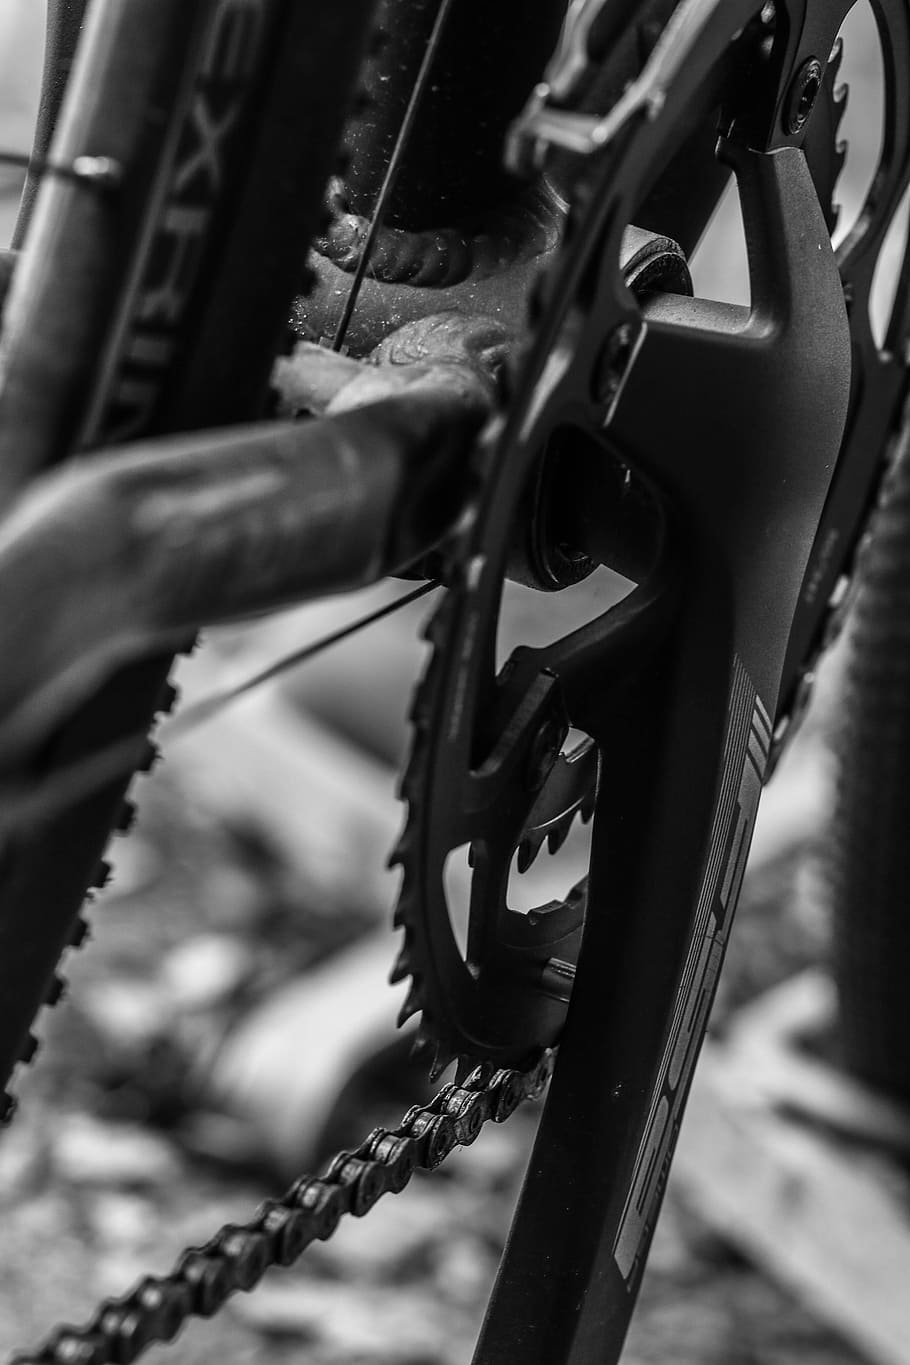 bike, part, macro, bicycle, cycle, metal, focus on foreground, chain, close-up, mode of transportation